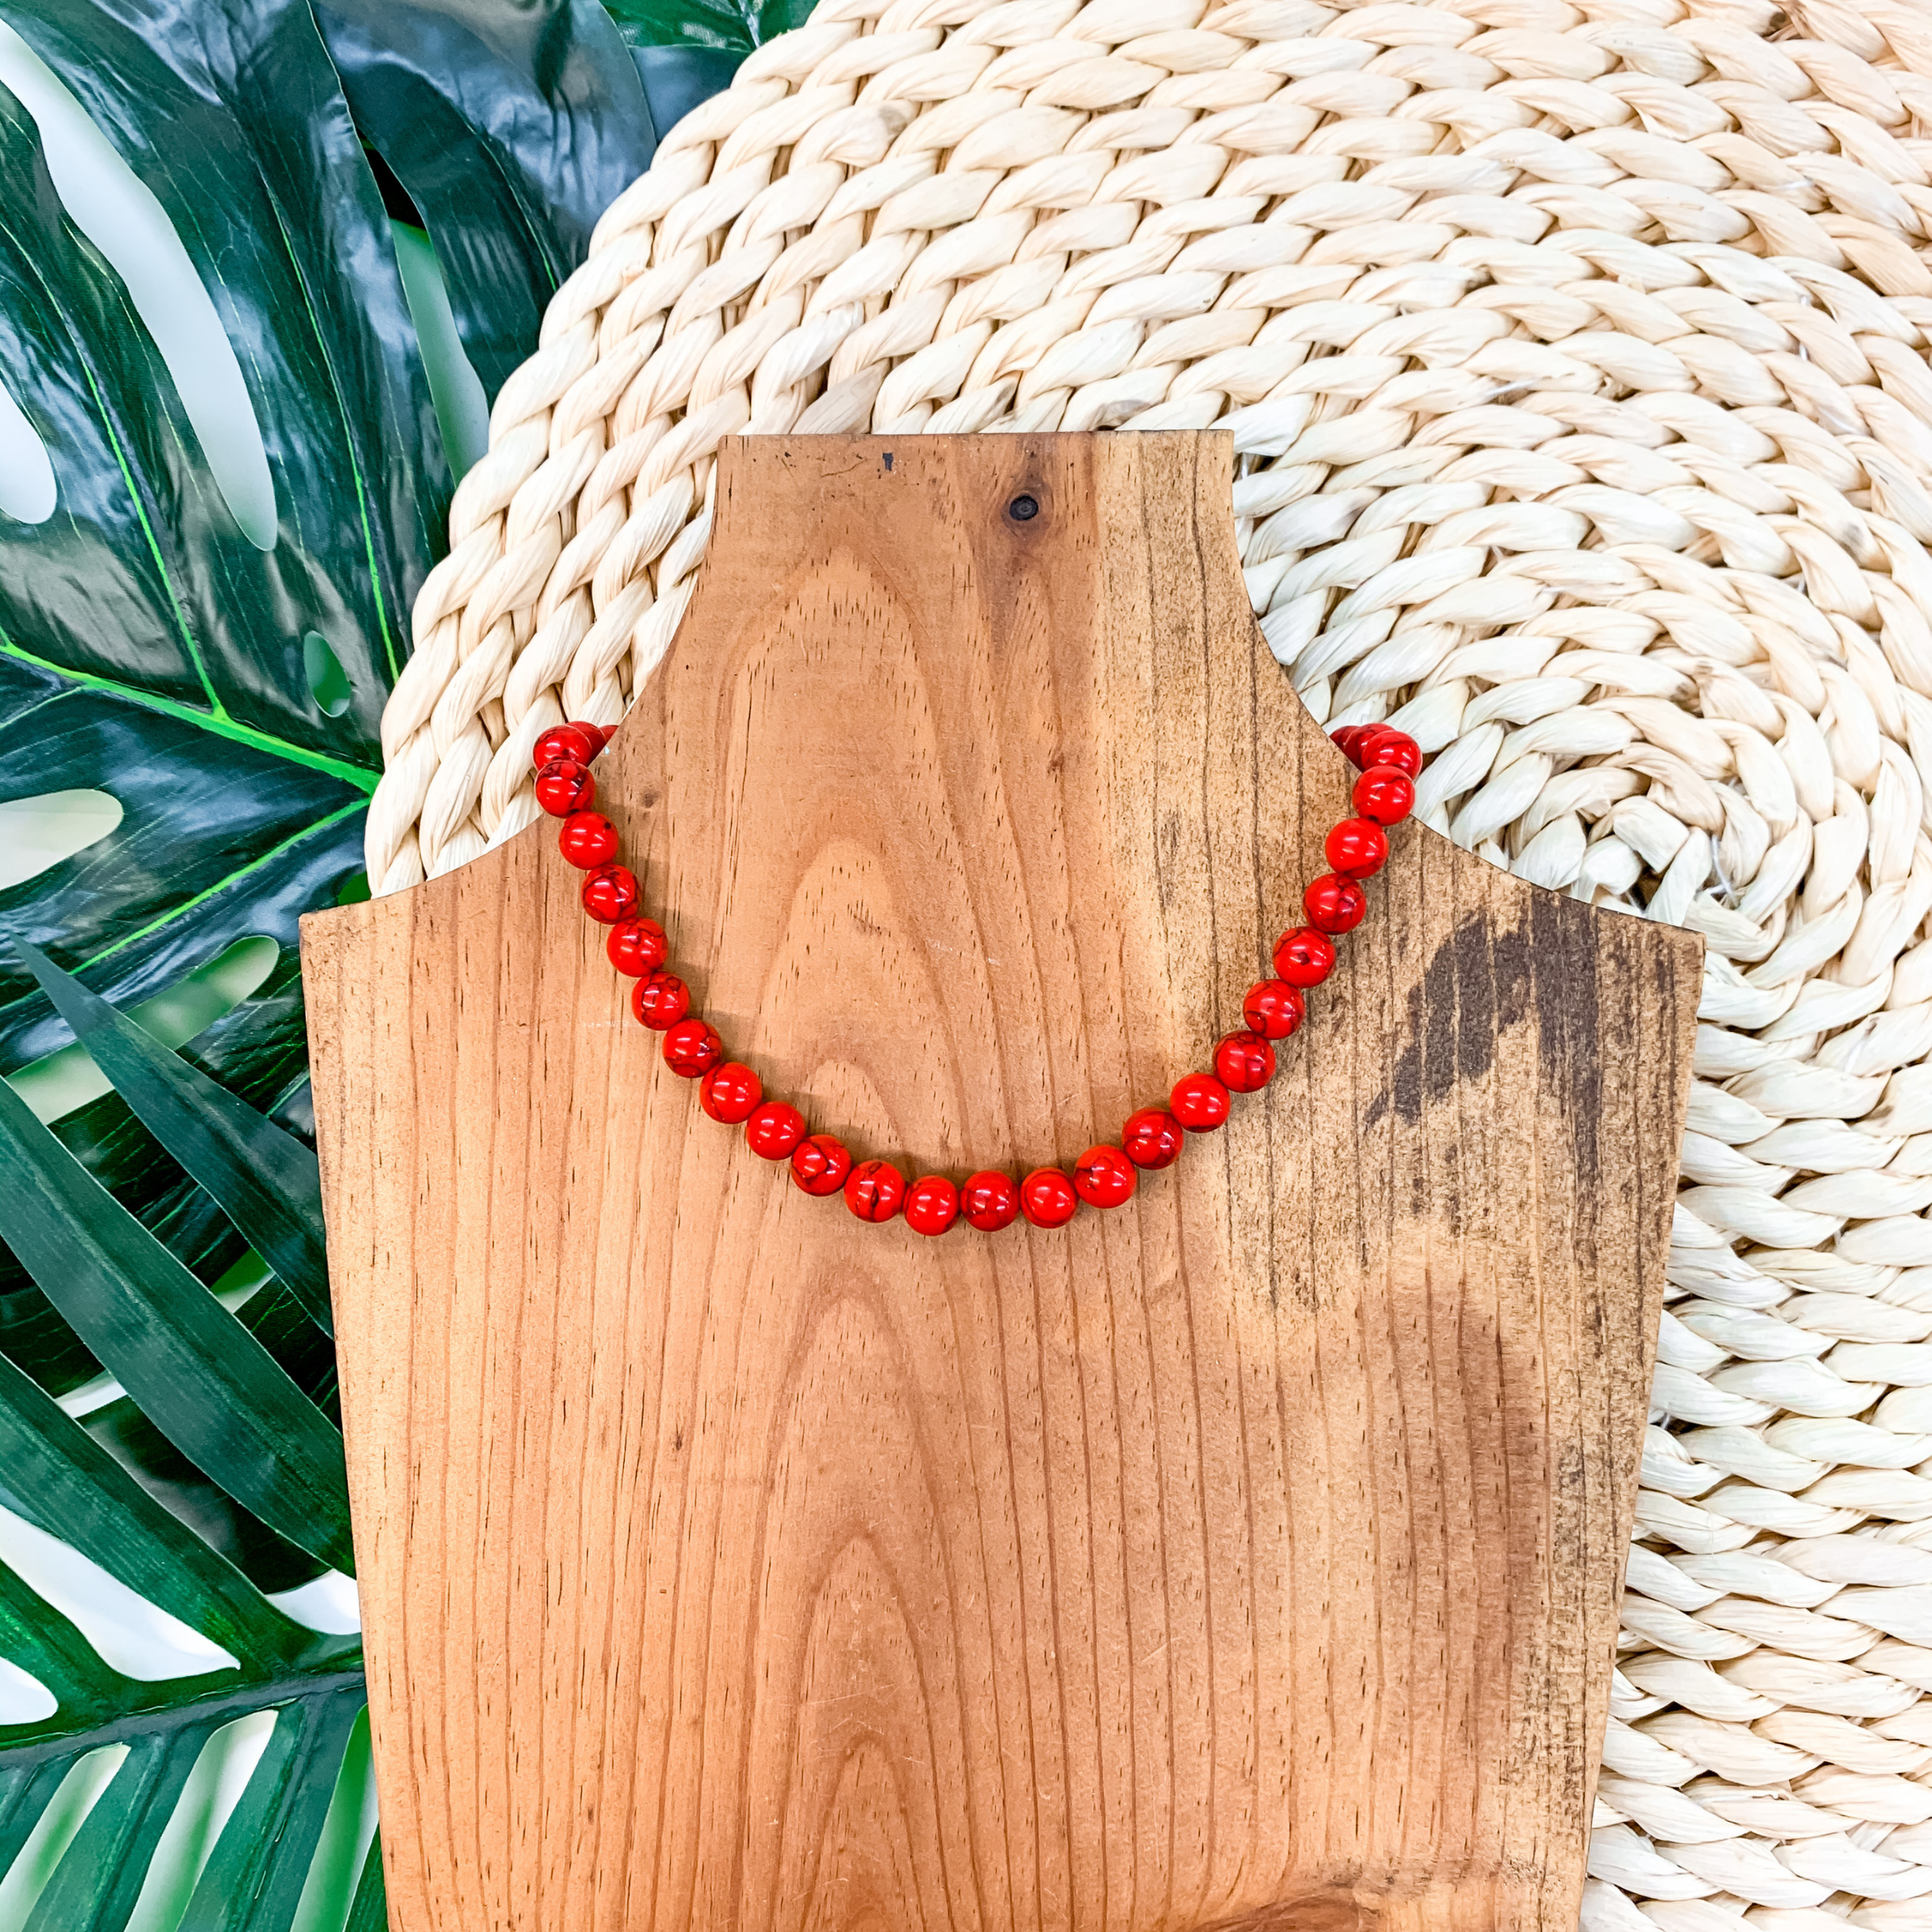 Beaded Stone Choker Necklace In Red - Giddy Up Glamour Boutique